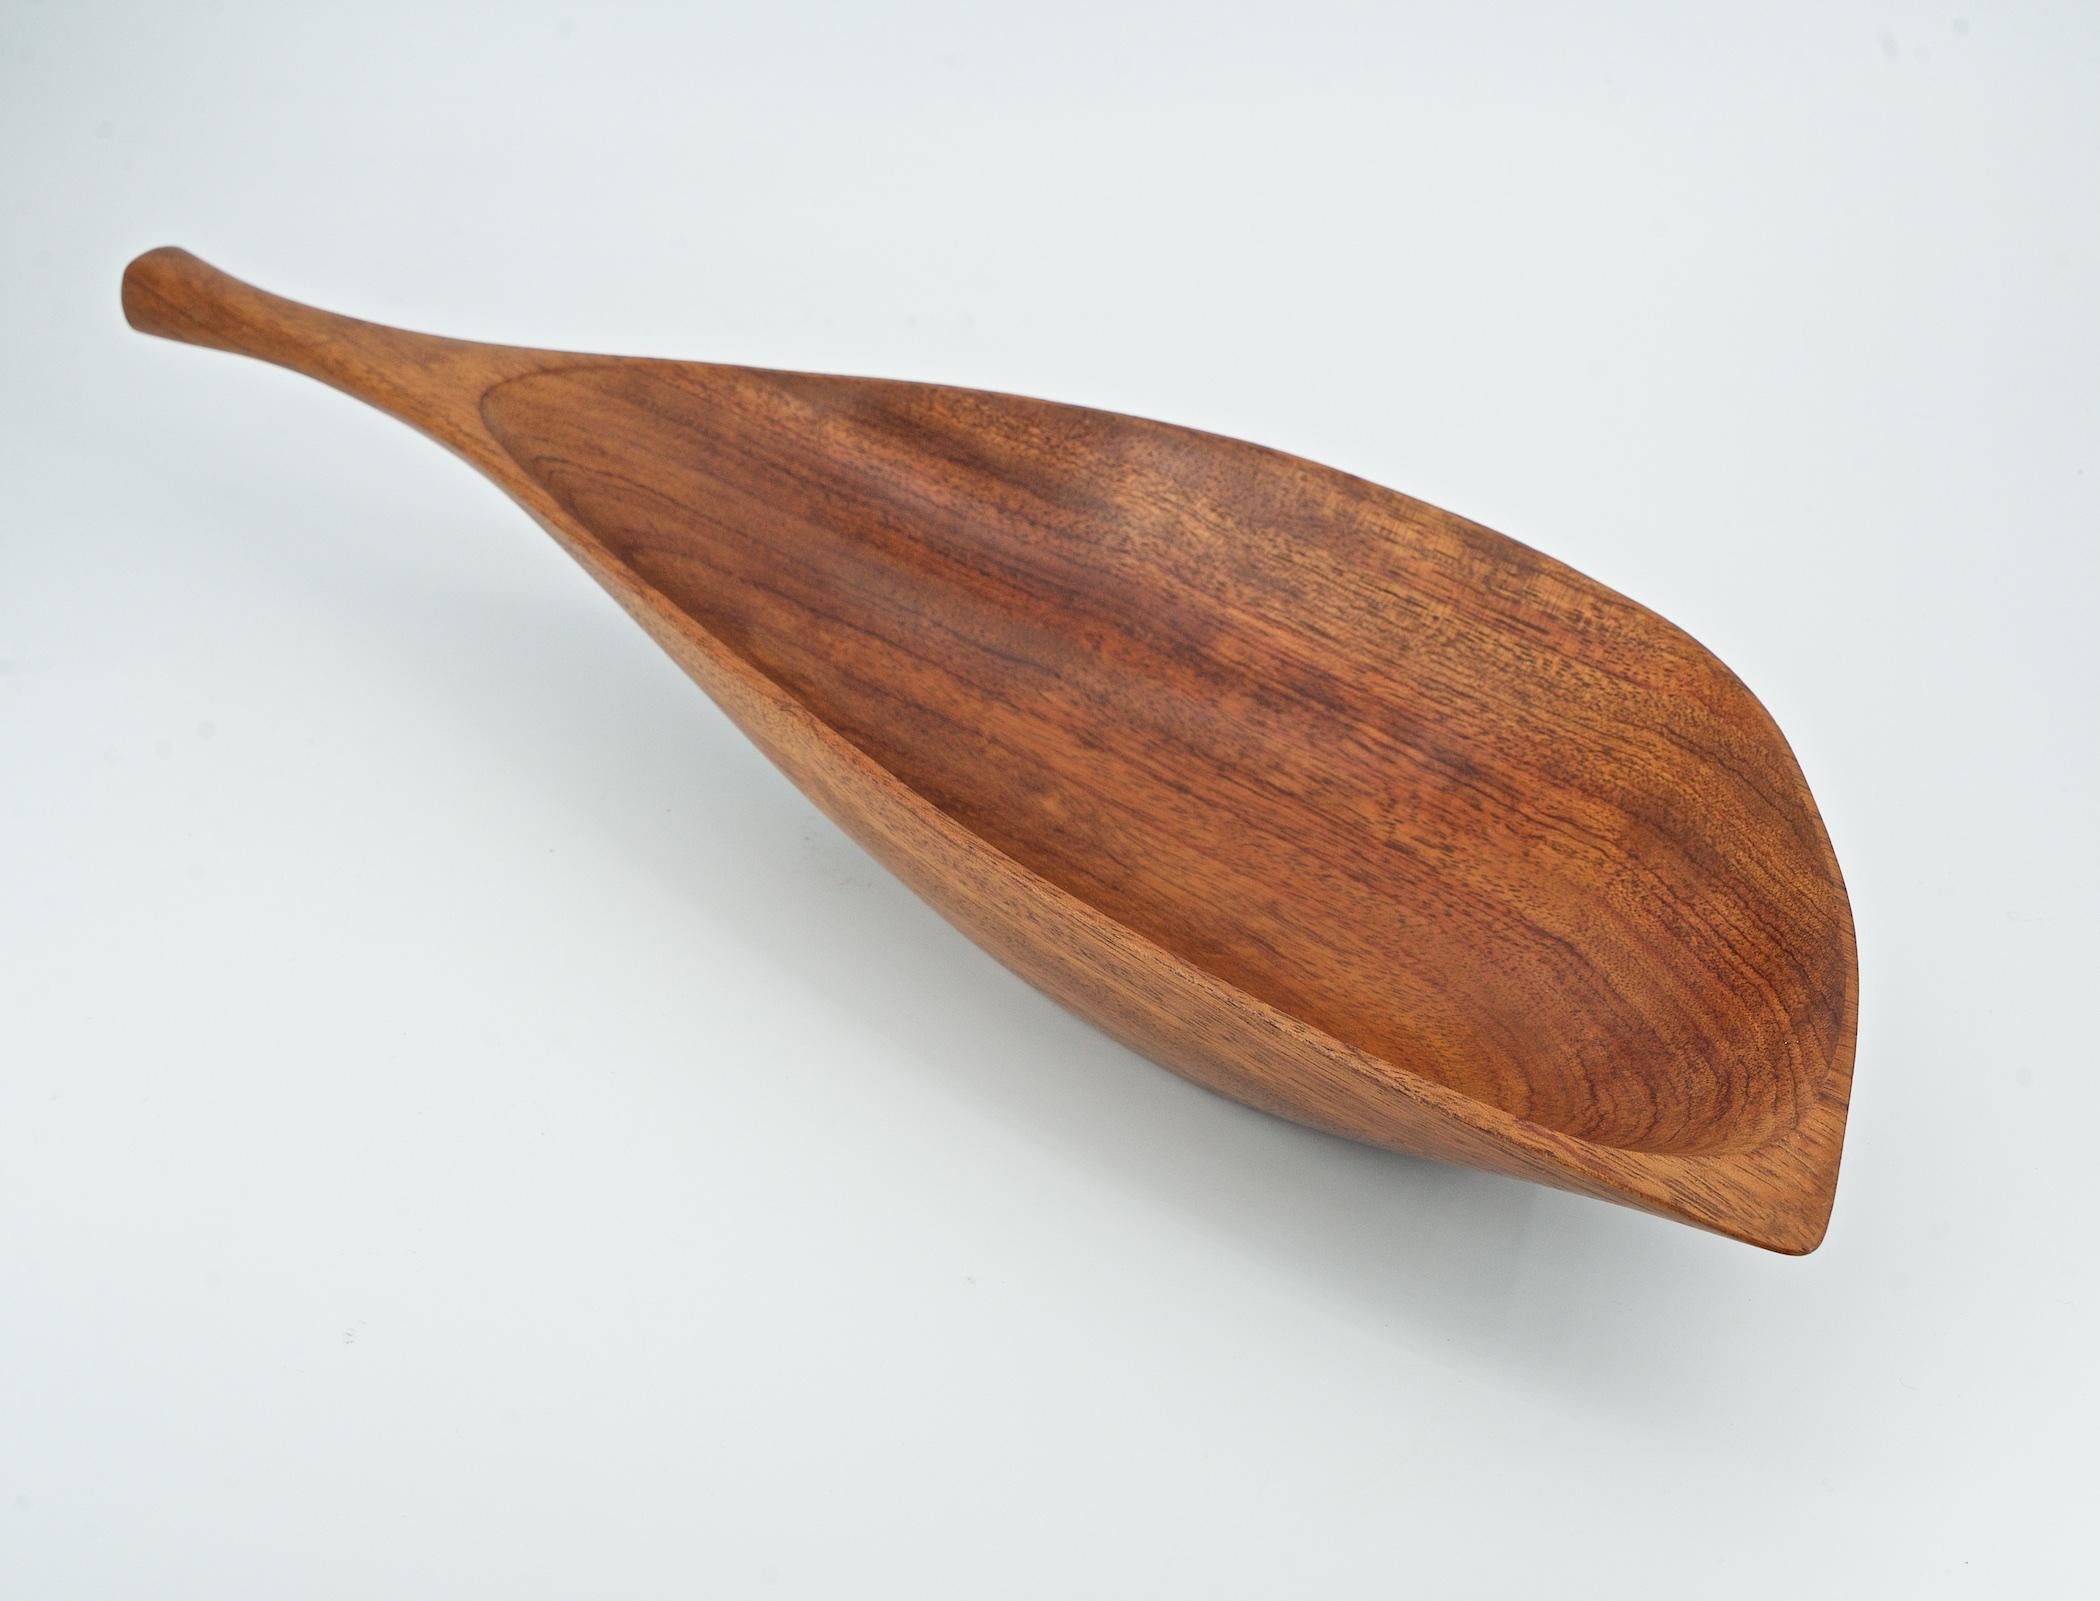 Hand-Crafted Centerpiece Rare Wood Fruit Bowl Mid 20th Century American Craftsman Design For Sale